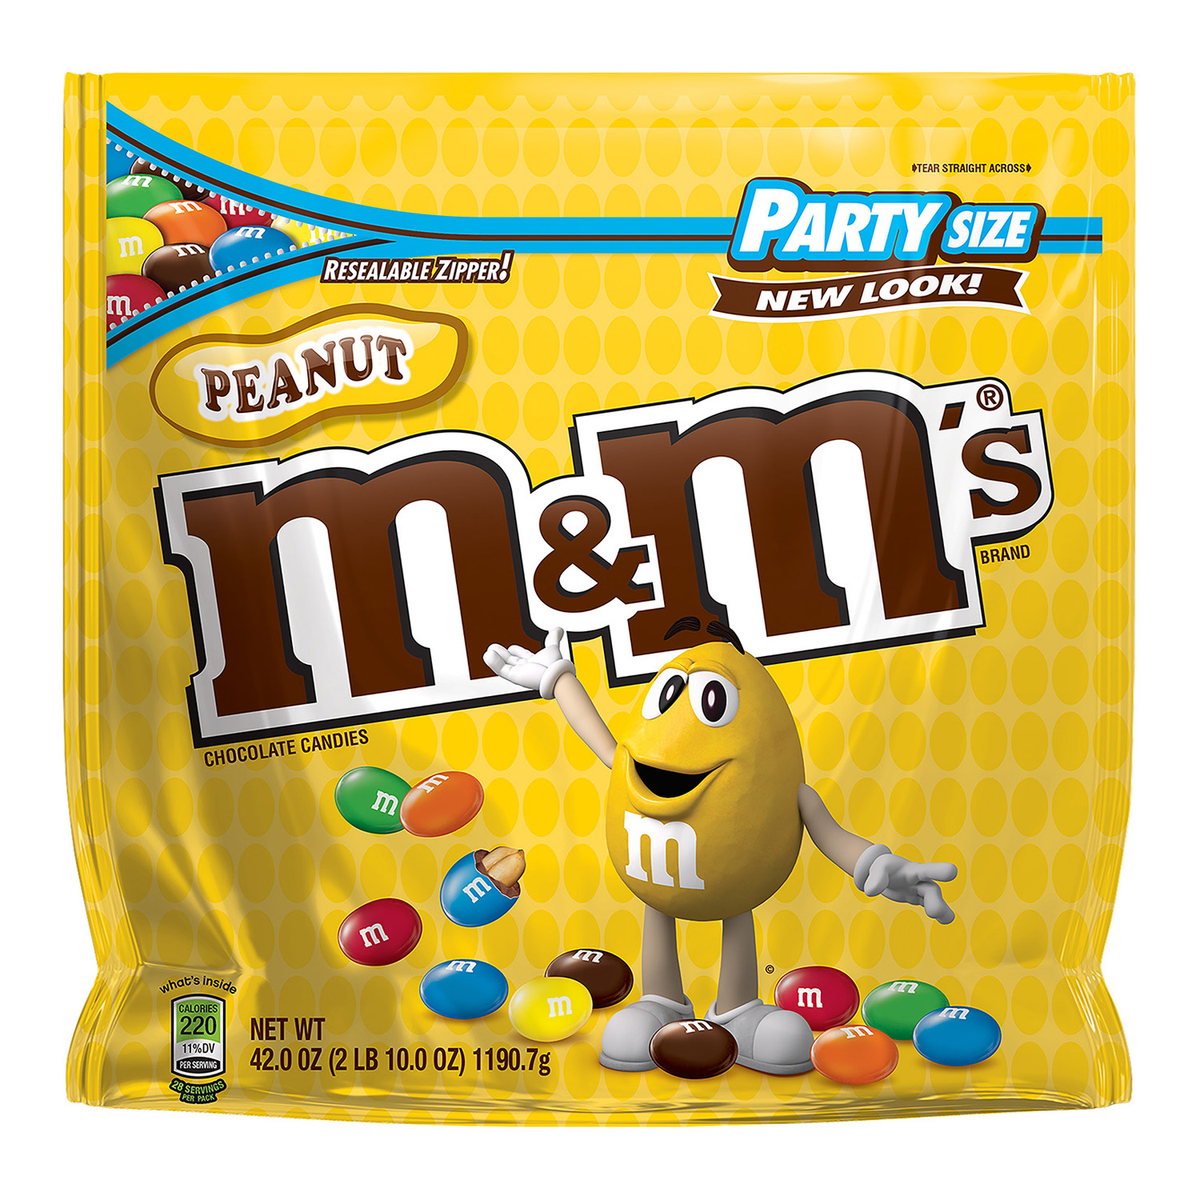 M&M's Limited Edition Peanut Butter Chocolate Candy - 9 oz Bag